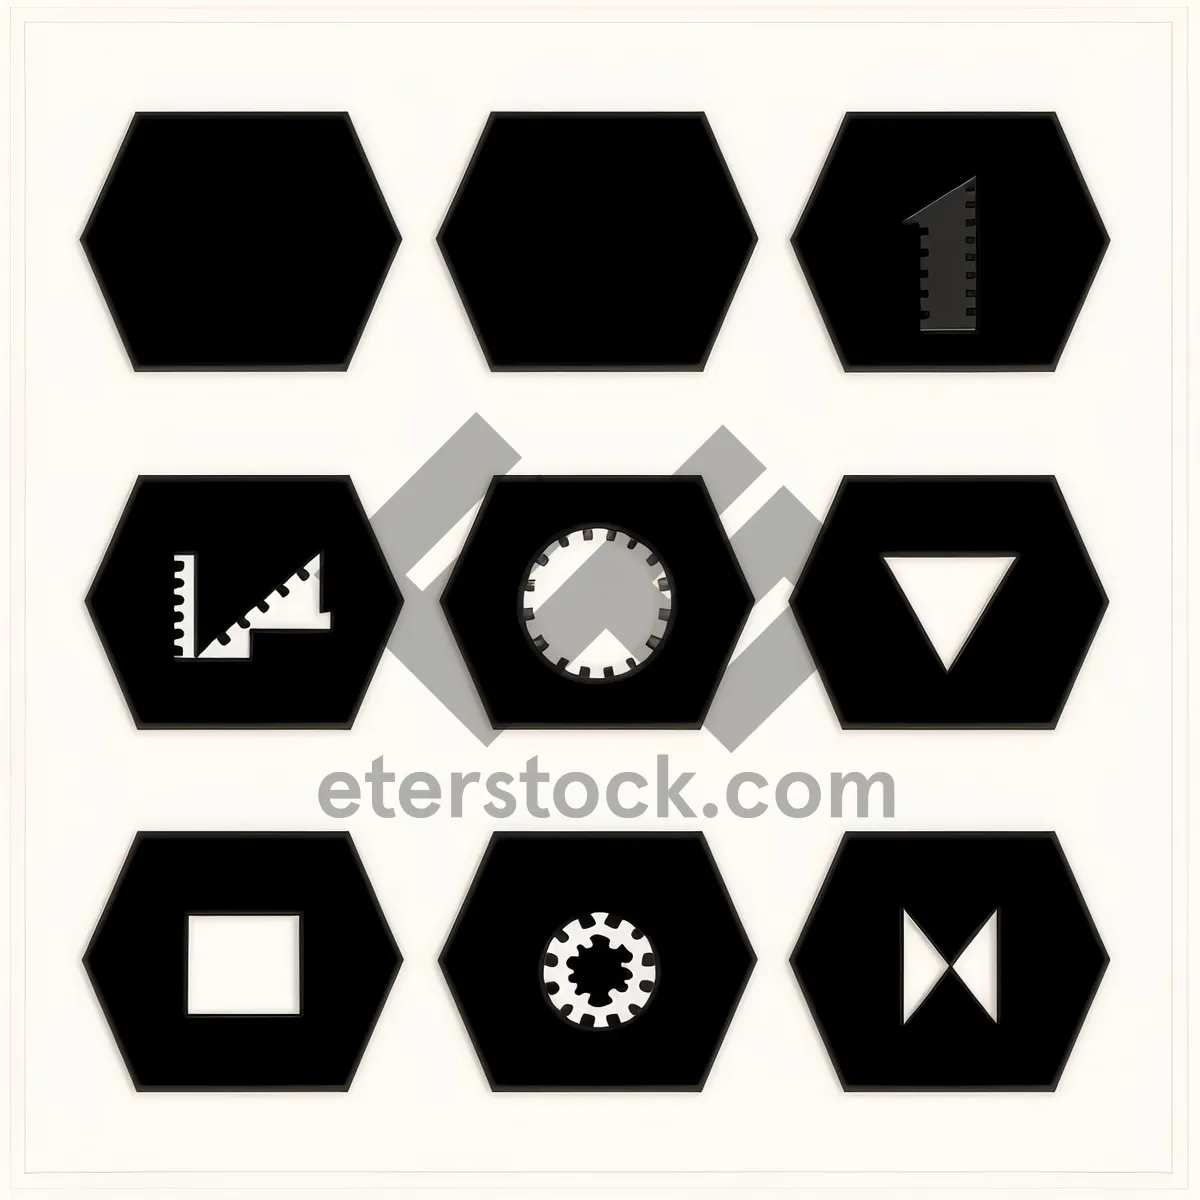 Picture of Web Buttons: Black Contour Icon Collection